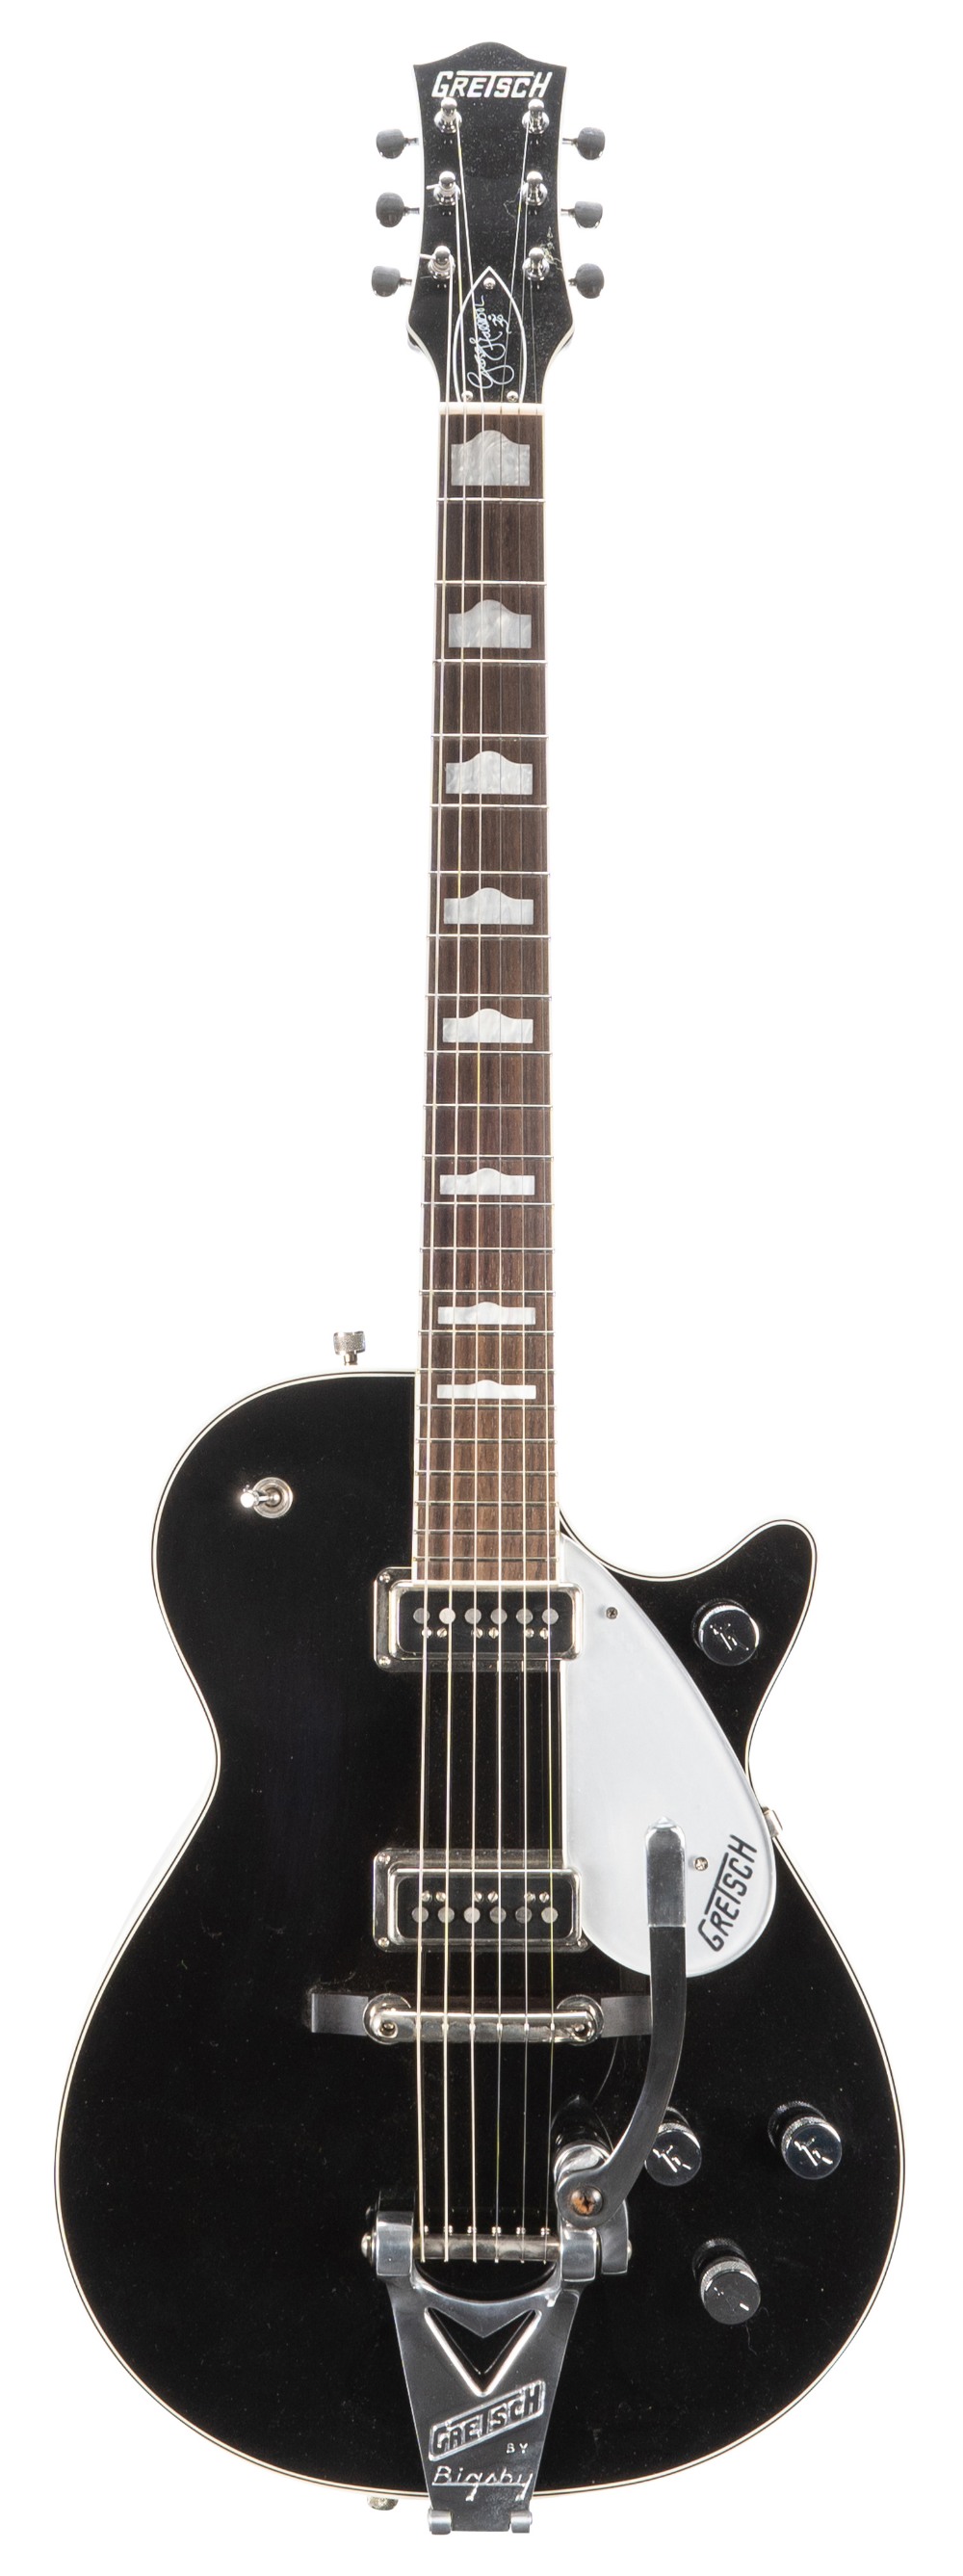 2011 Gretsch G6128T-GH George Harrison signature Duo Jet electric guitar, made in Japan, ser. no.